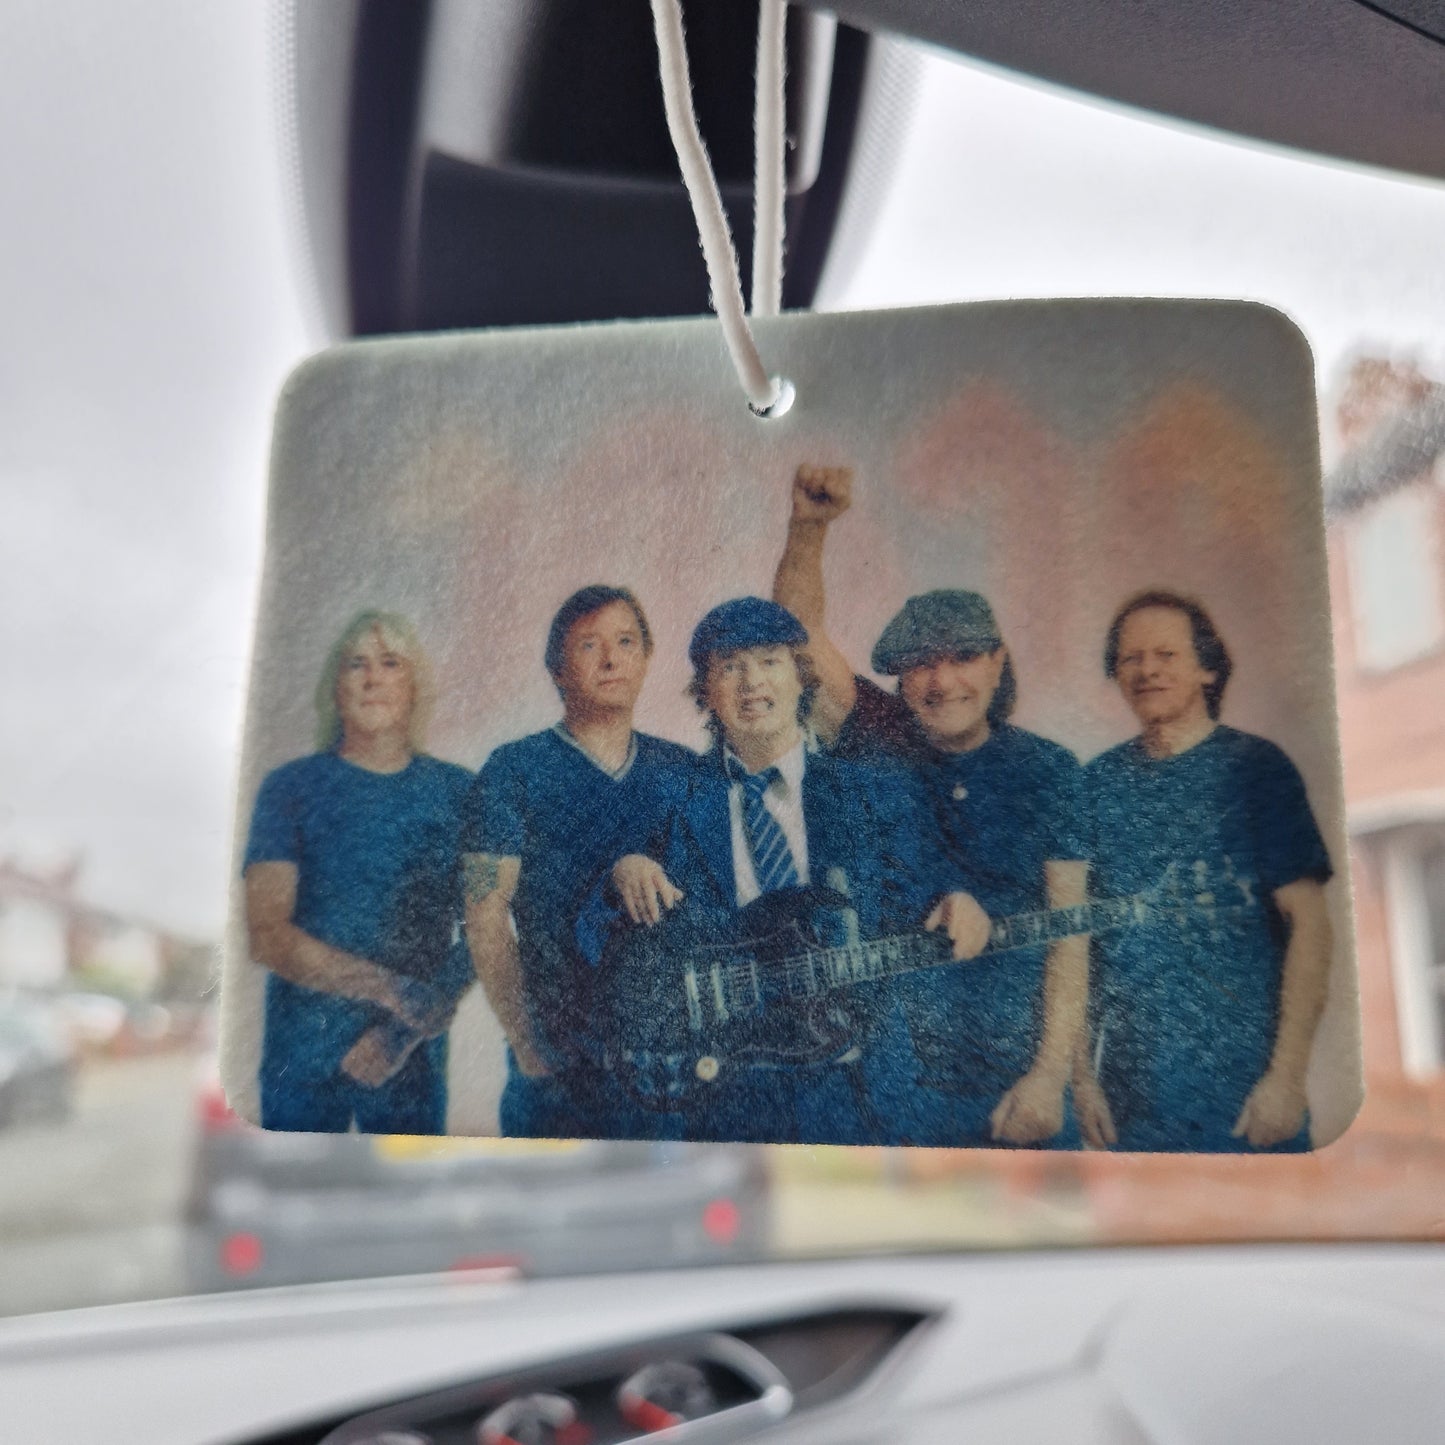 acdc group image on picture car air freshener perfect gift for music lovers